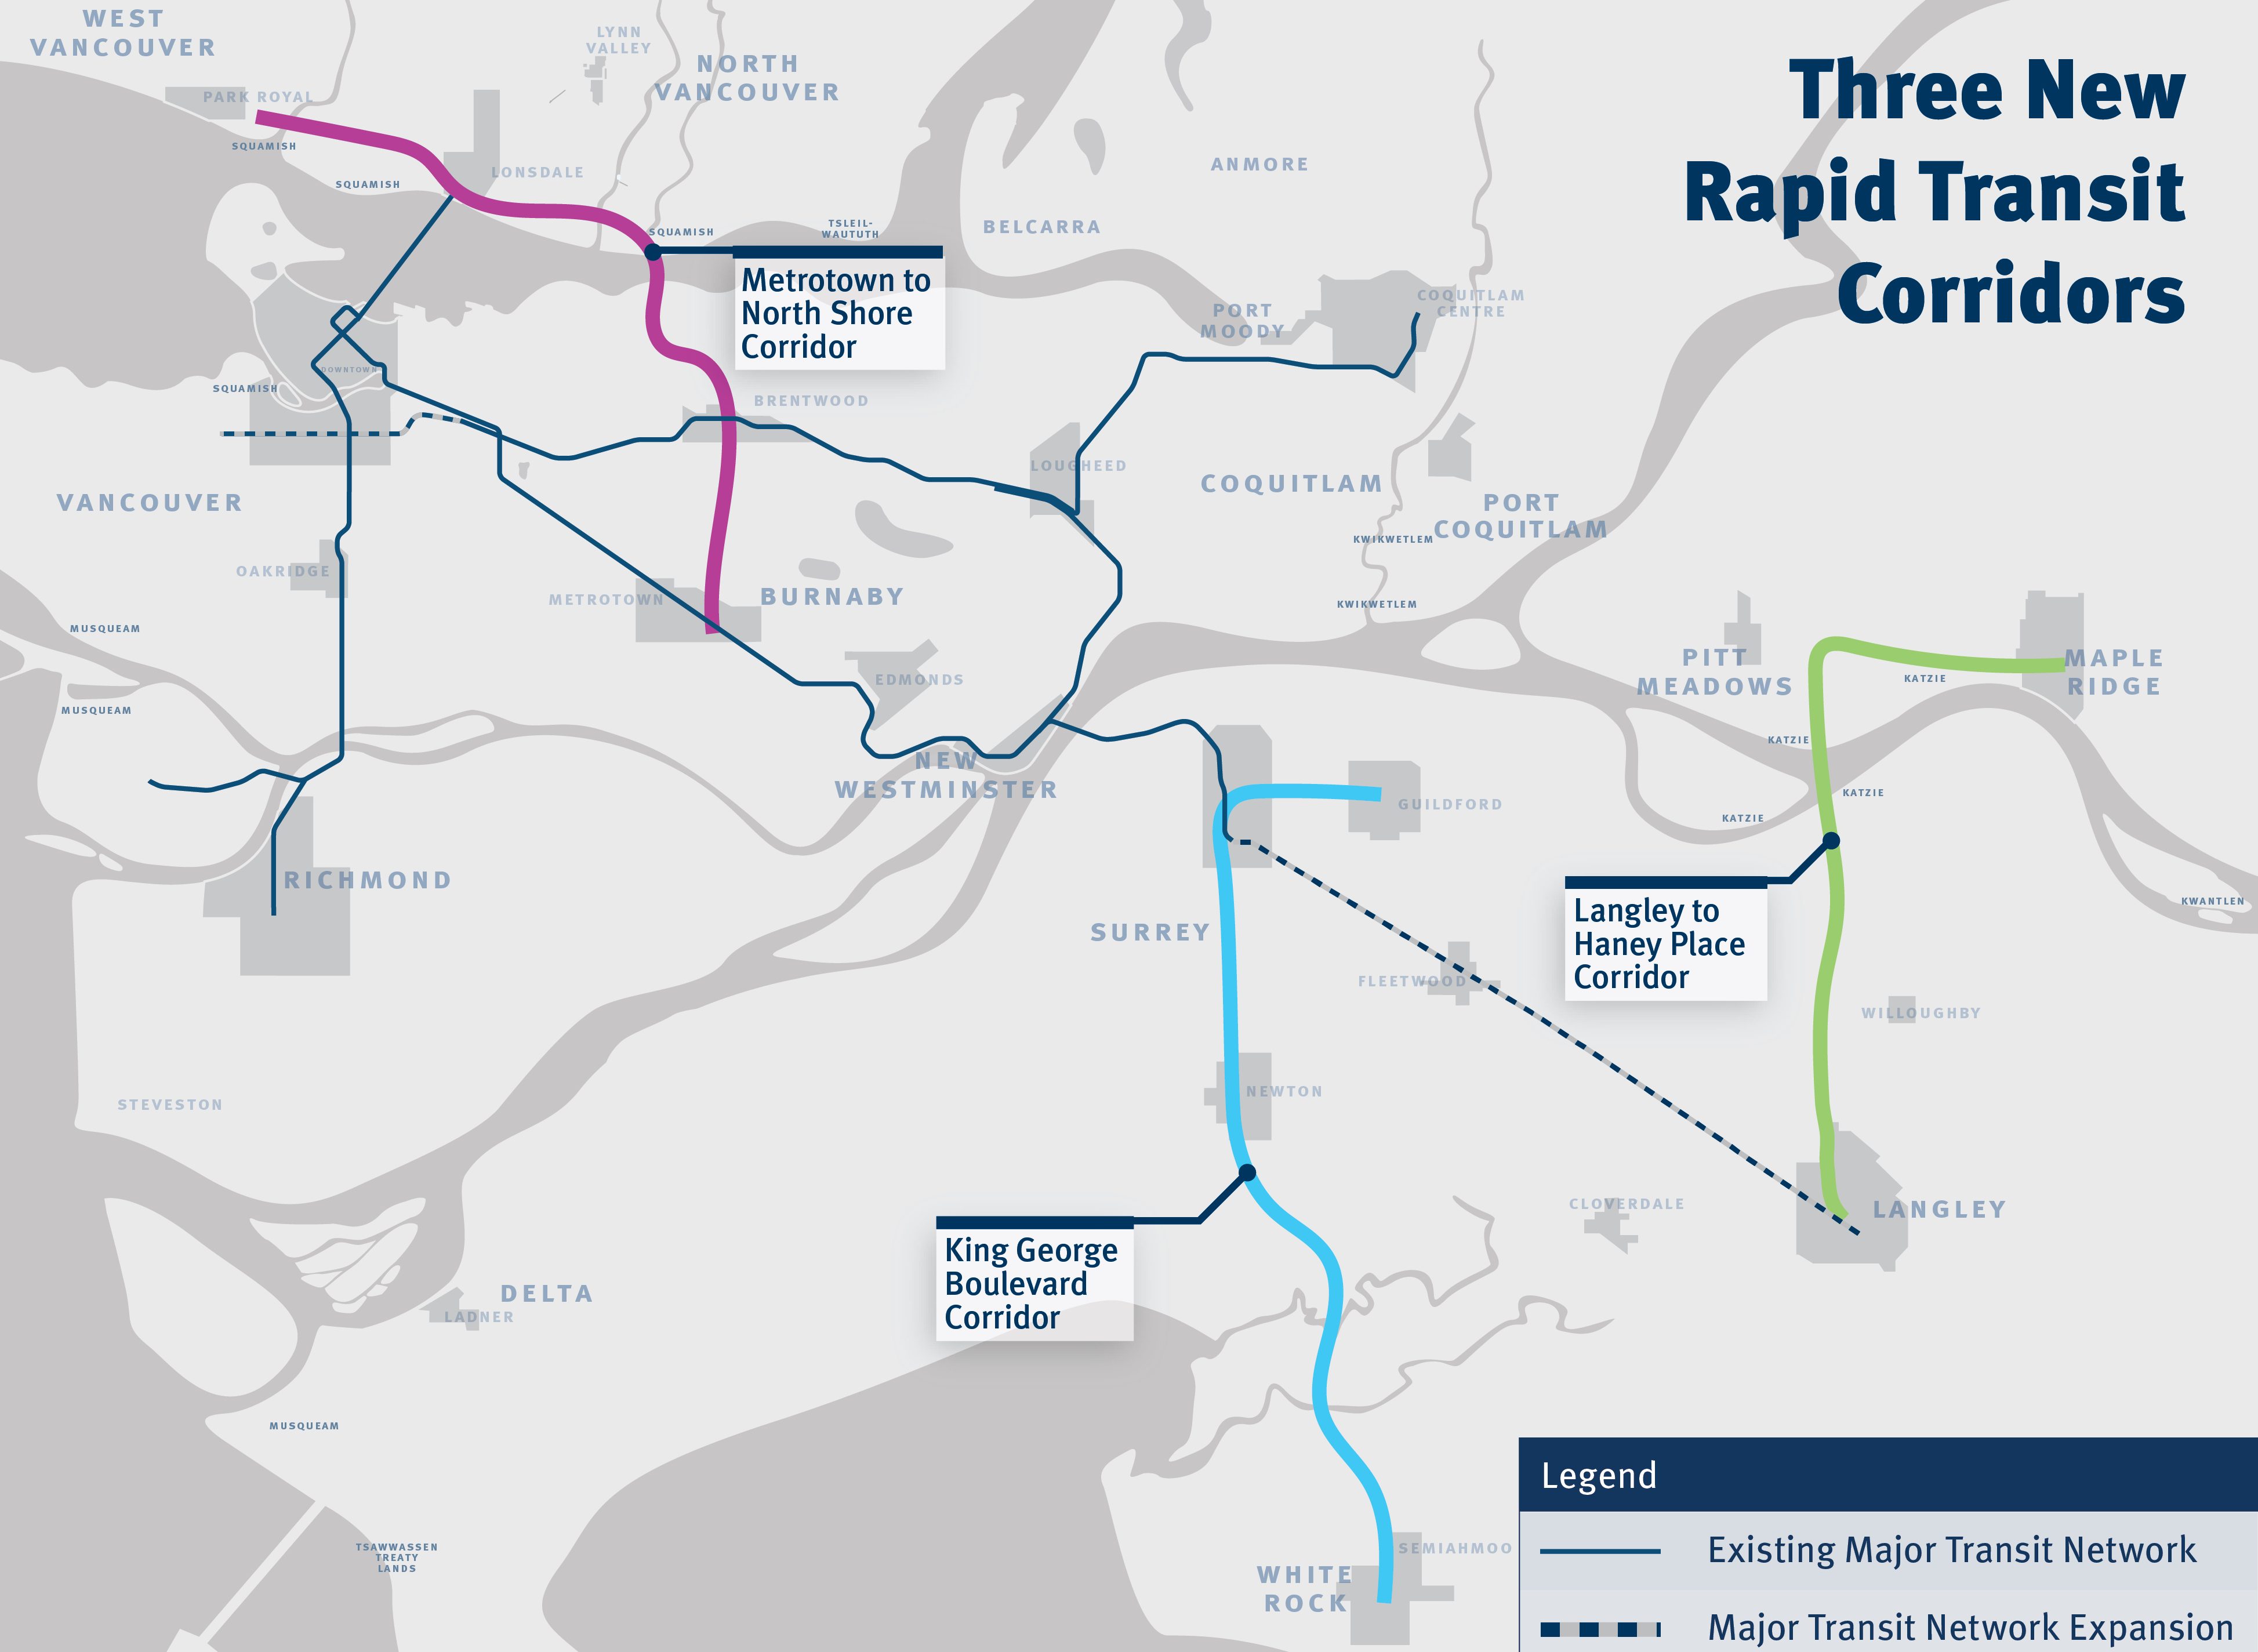 TransLink unveils first 3 planned new Bus Rapid Transit routes